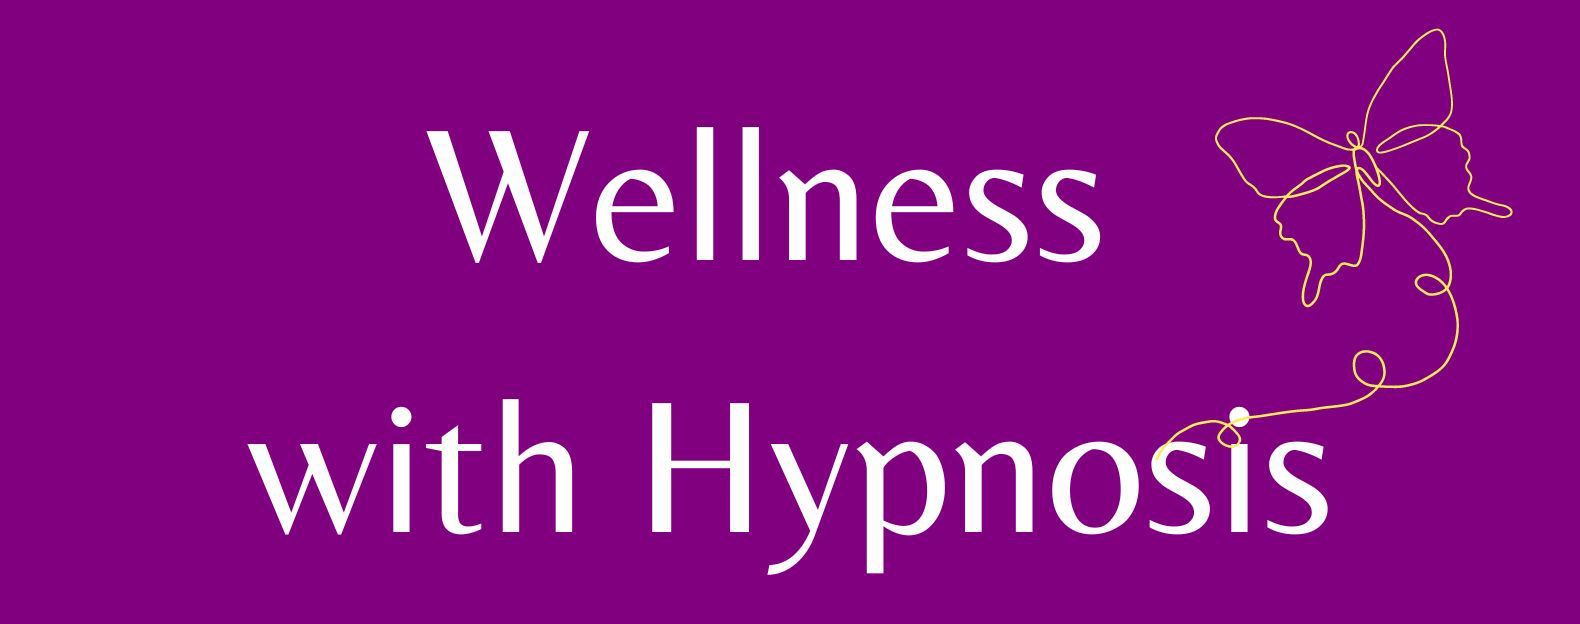 Wellness with Hypnosis